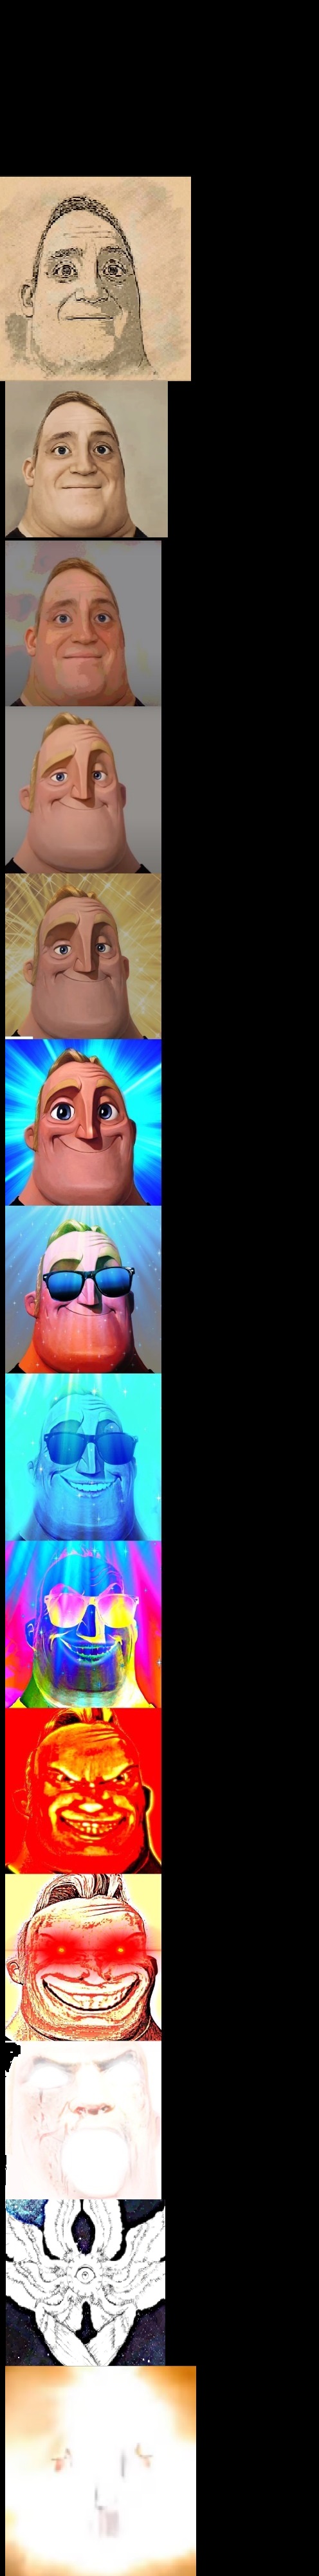 mr incredible becoming canny new version Blank Meme Template